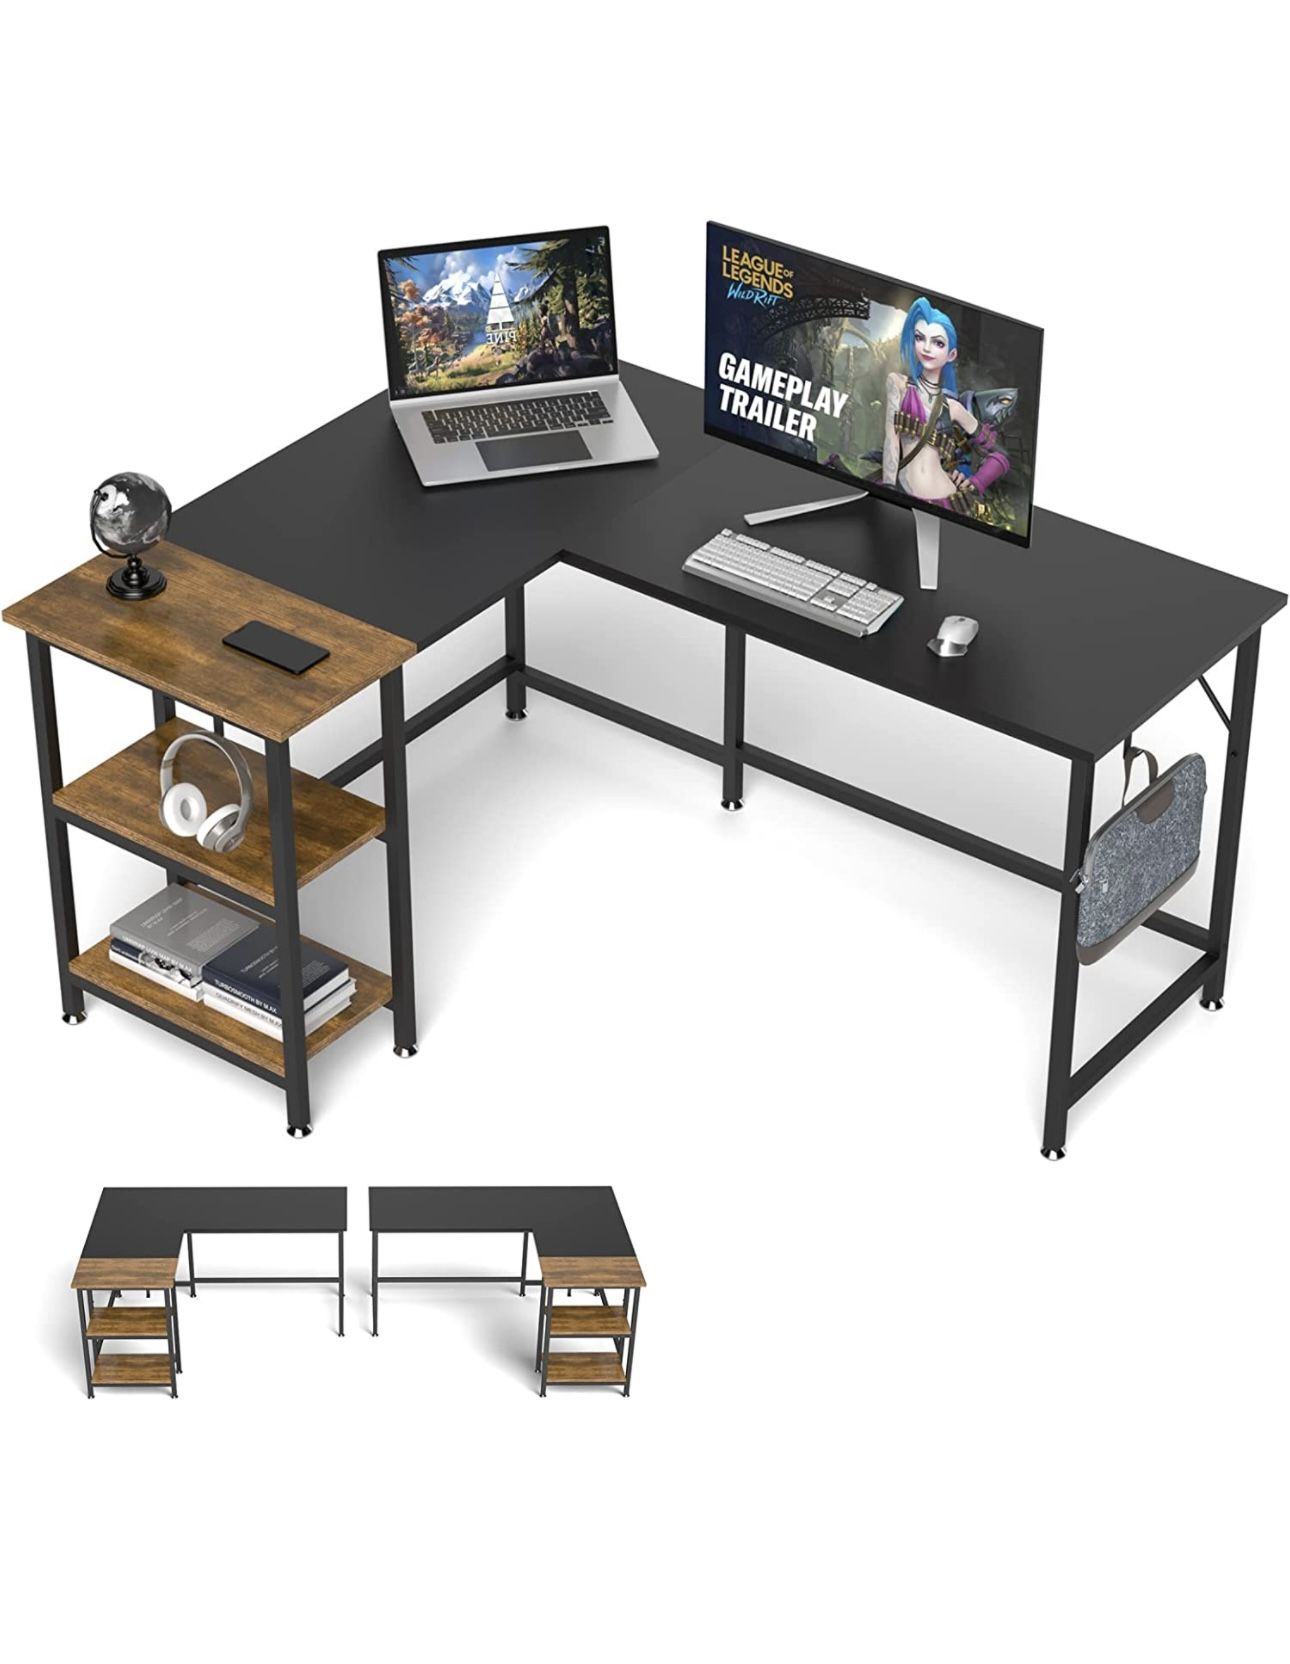 Klvied L Shaped Desk for Home Office, Double Color L Table with Storage Shelves